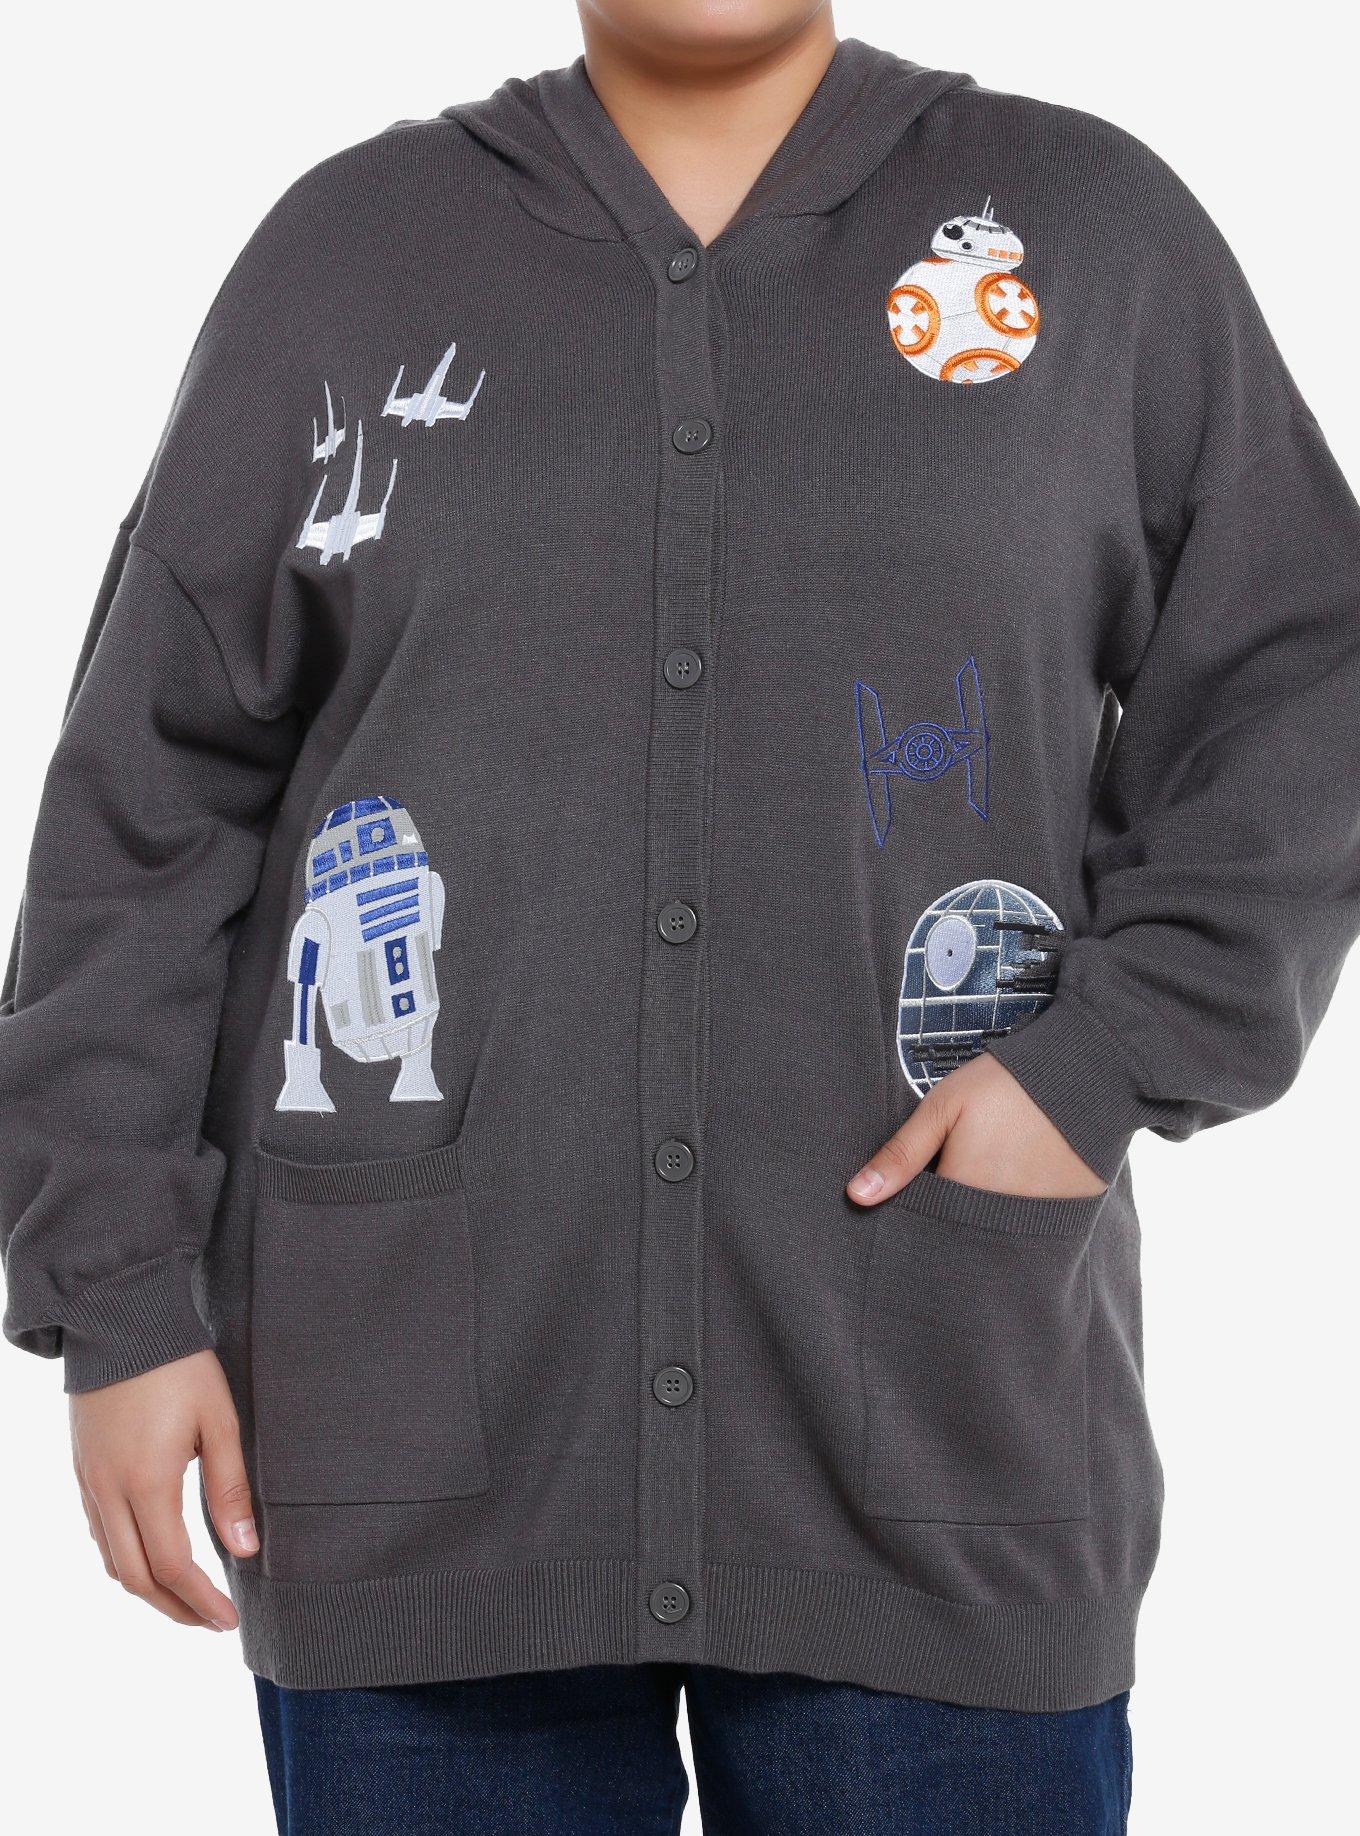 Her Universe Star Wars Droids Hooded Cardigan Plus Size Her Universe Exclusive, DARK CHARCOAL, hi-res